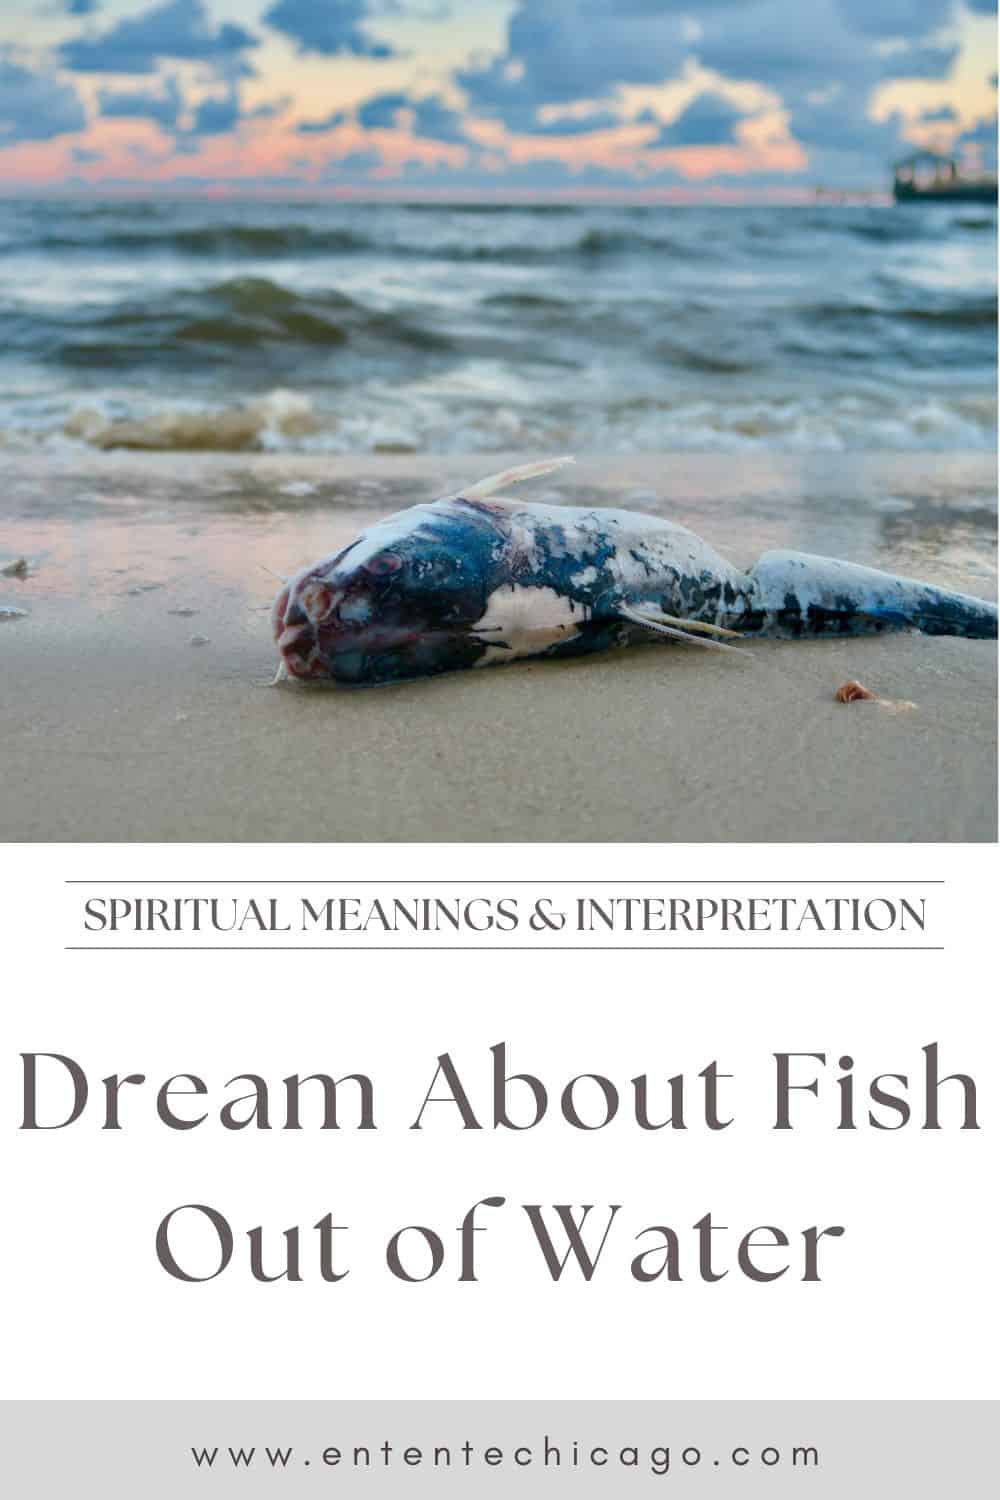 Spiritual Meanings When You Dream About Fish Out of Water